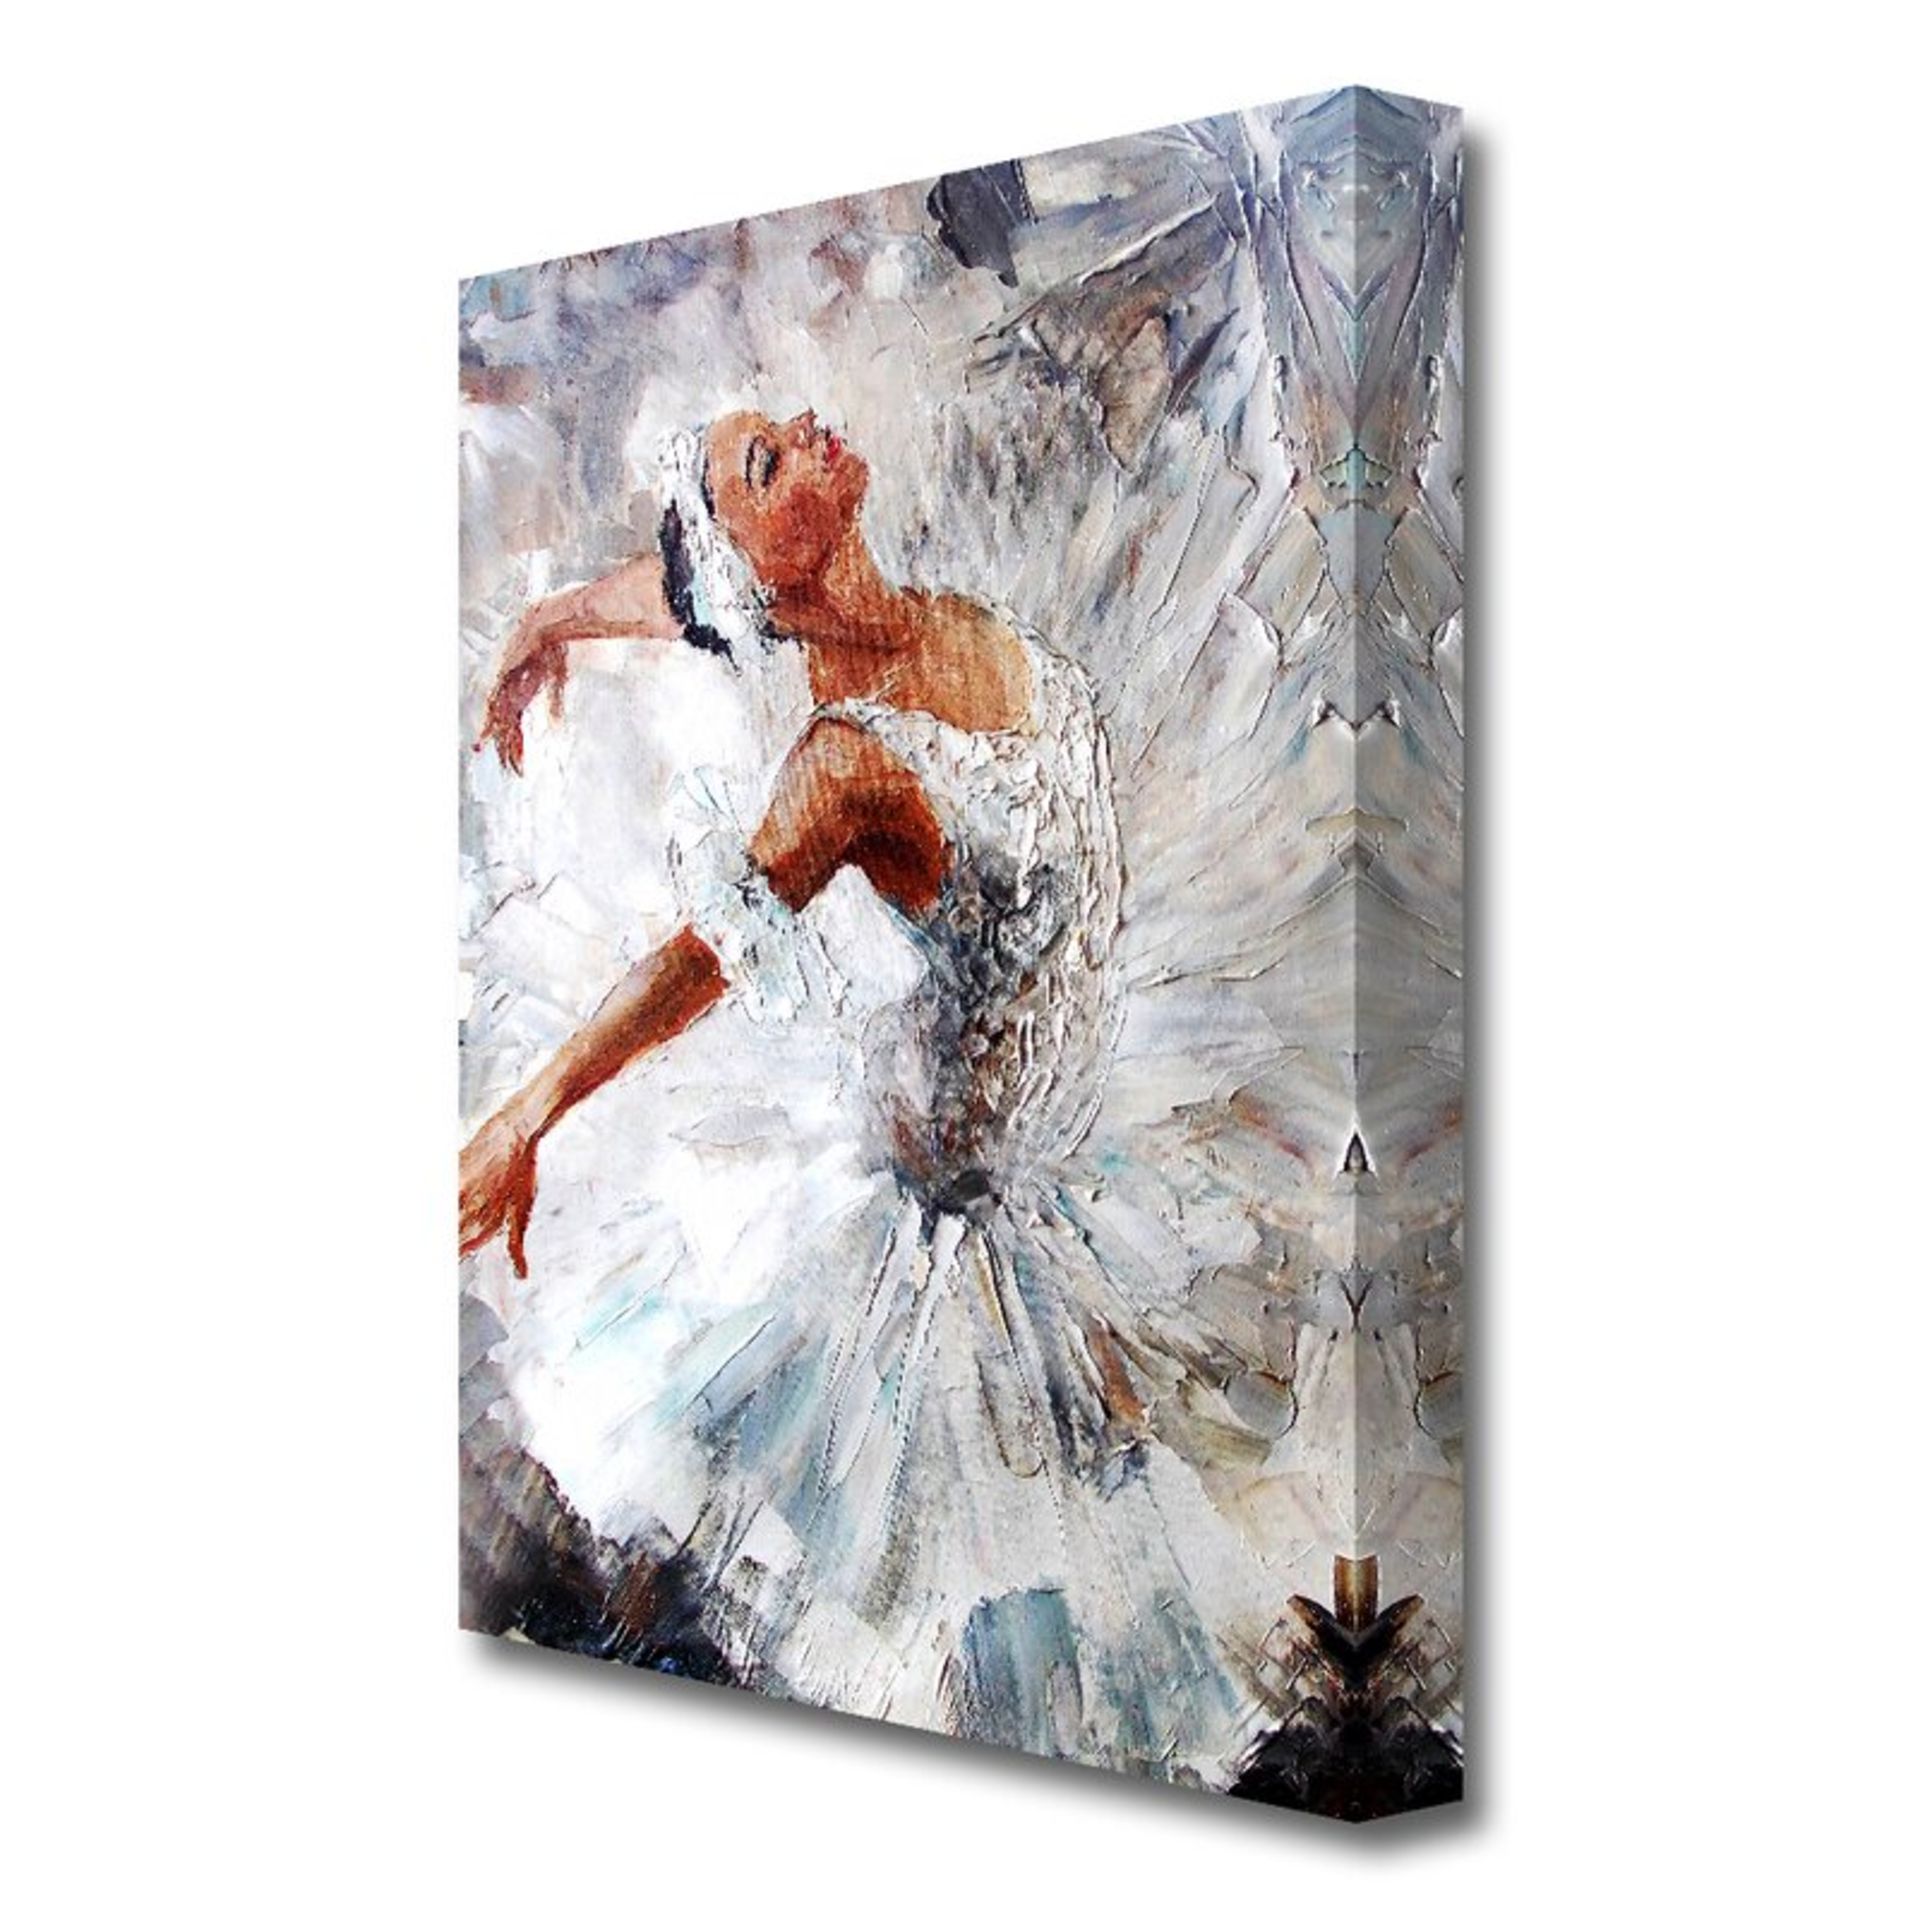 White Ballerina 2 Dance' Painting Print on Canvas - RRP £34.99